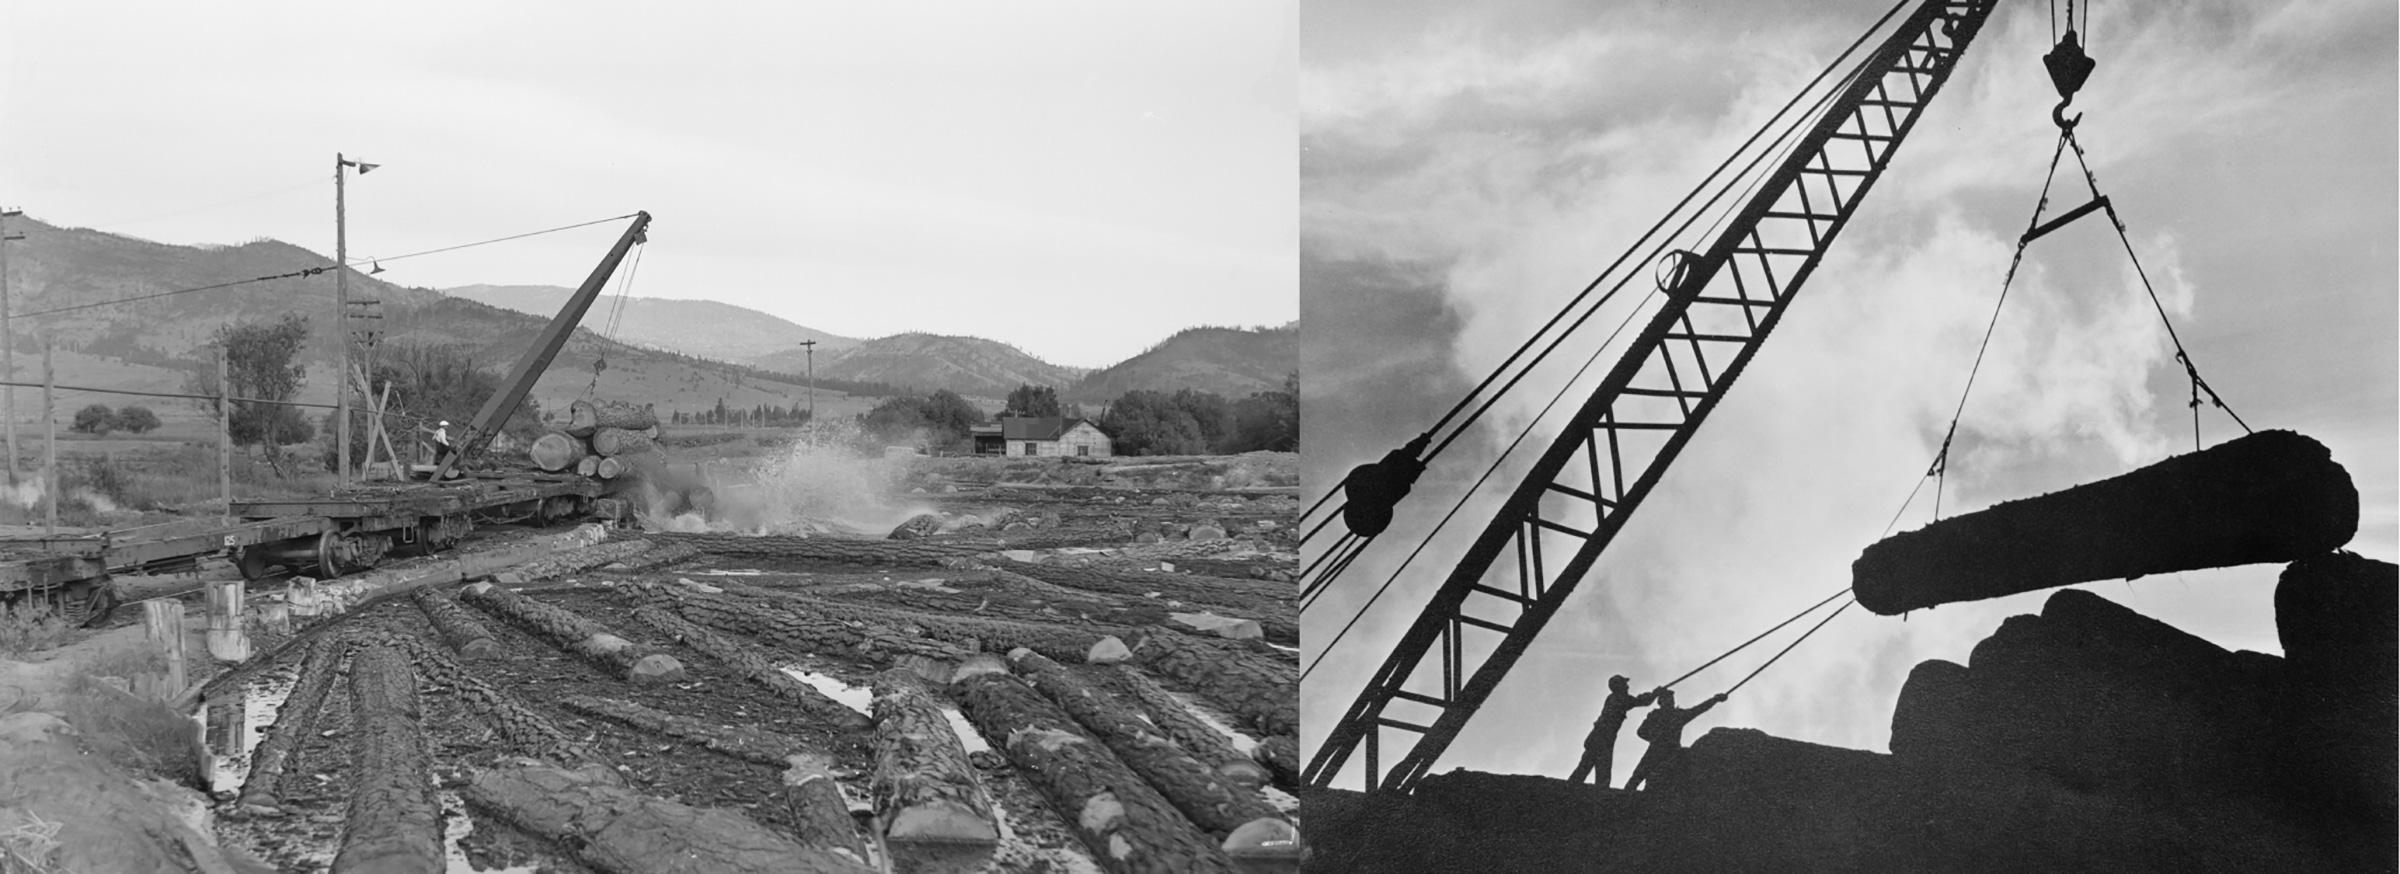 Black and white photo of saw mill on left and large crane lifting logs on the right.